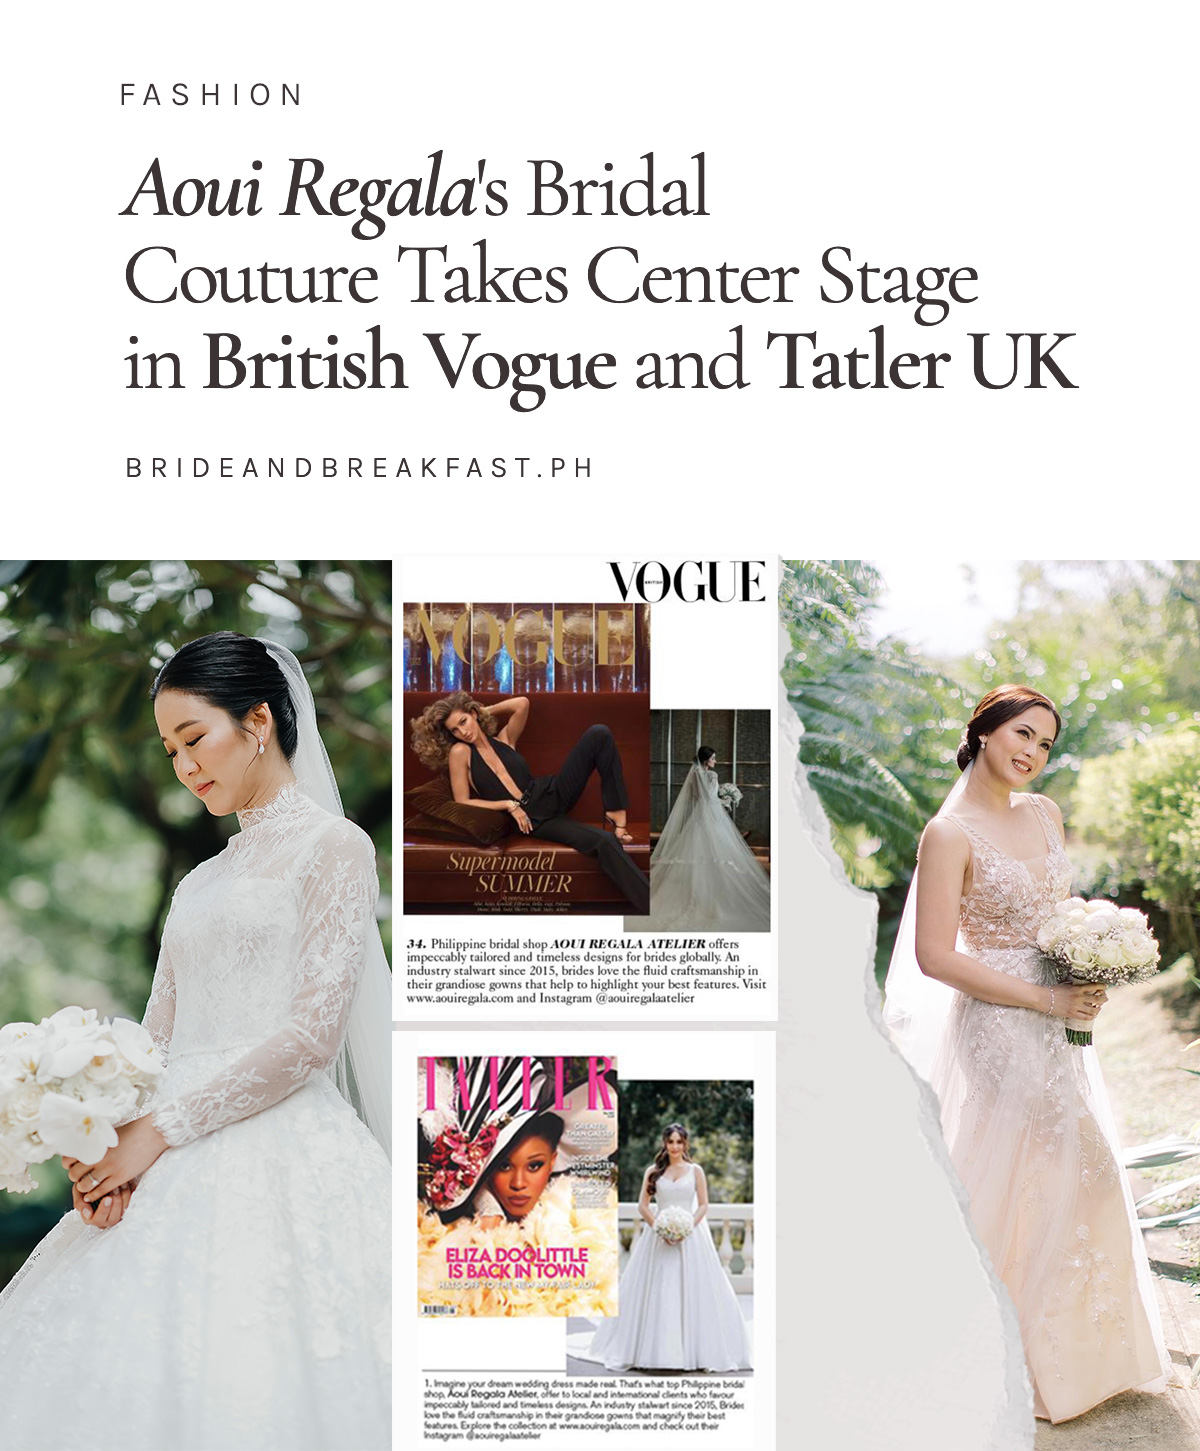 Aoui Regala's Bridal Couture Takes Center Stage in British Vogue and Tatler UK 